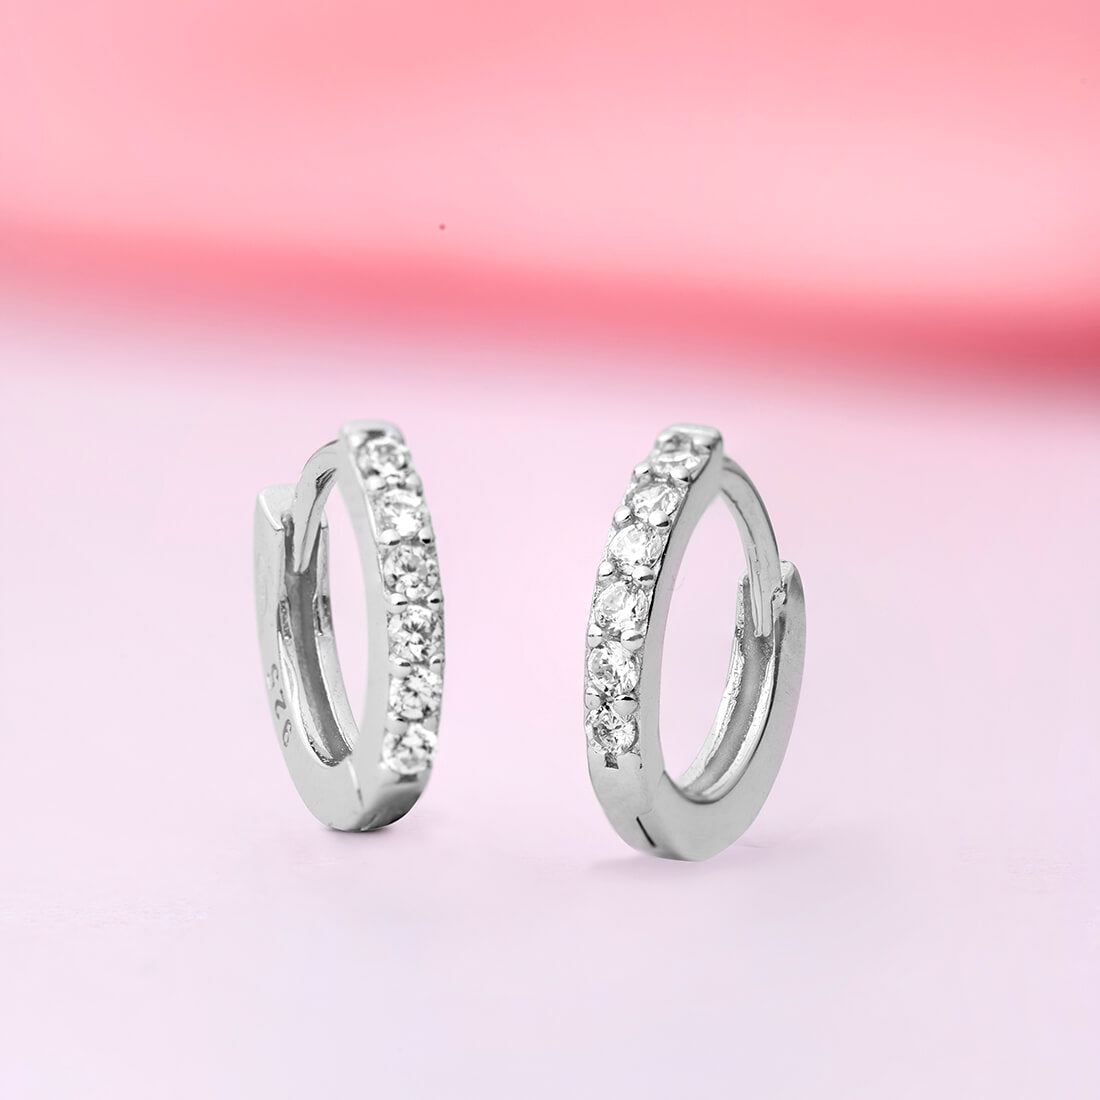 The Classic Moment Hoop 925 Silver Earrings